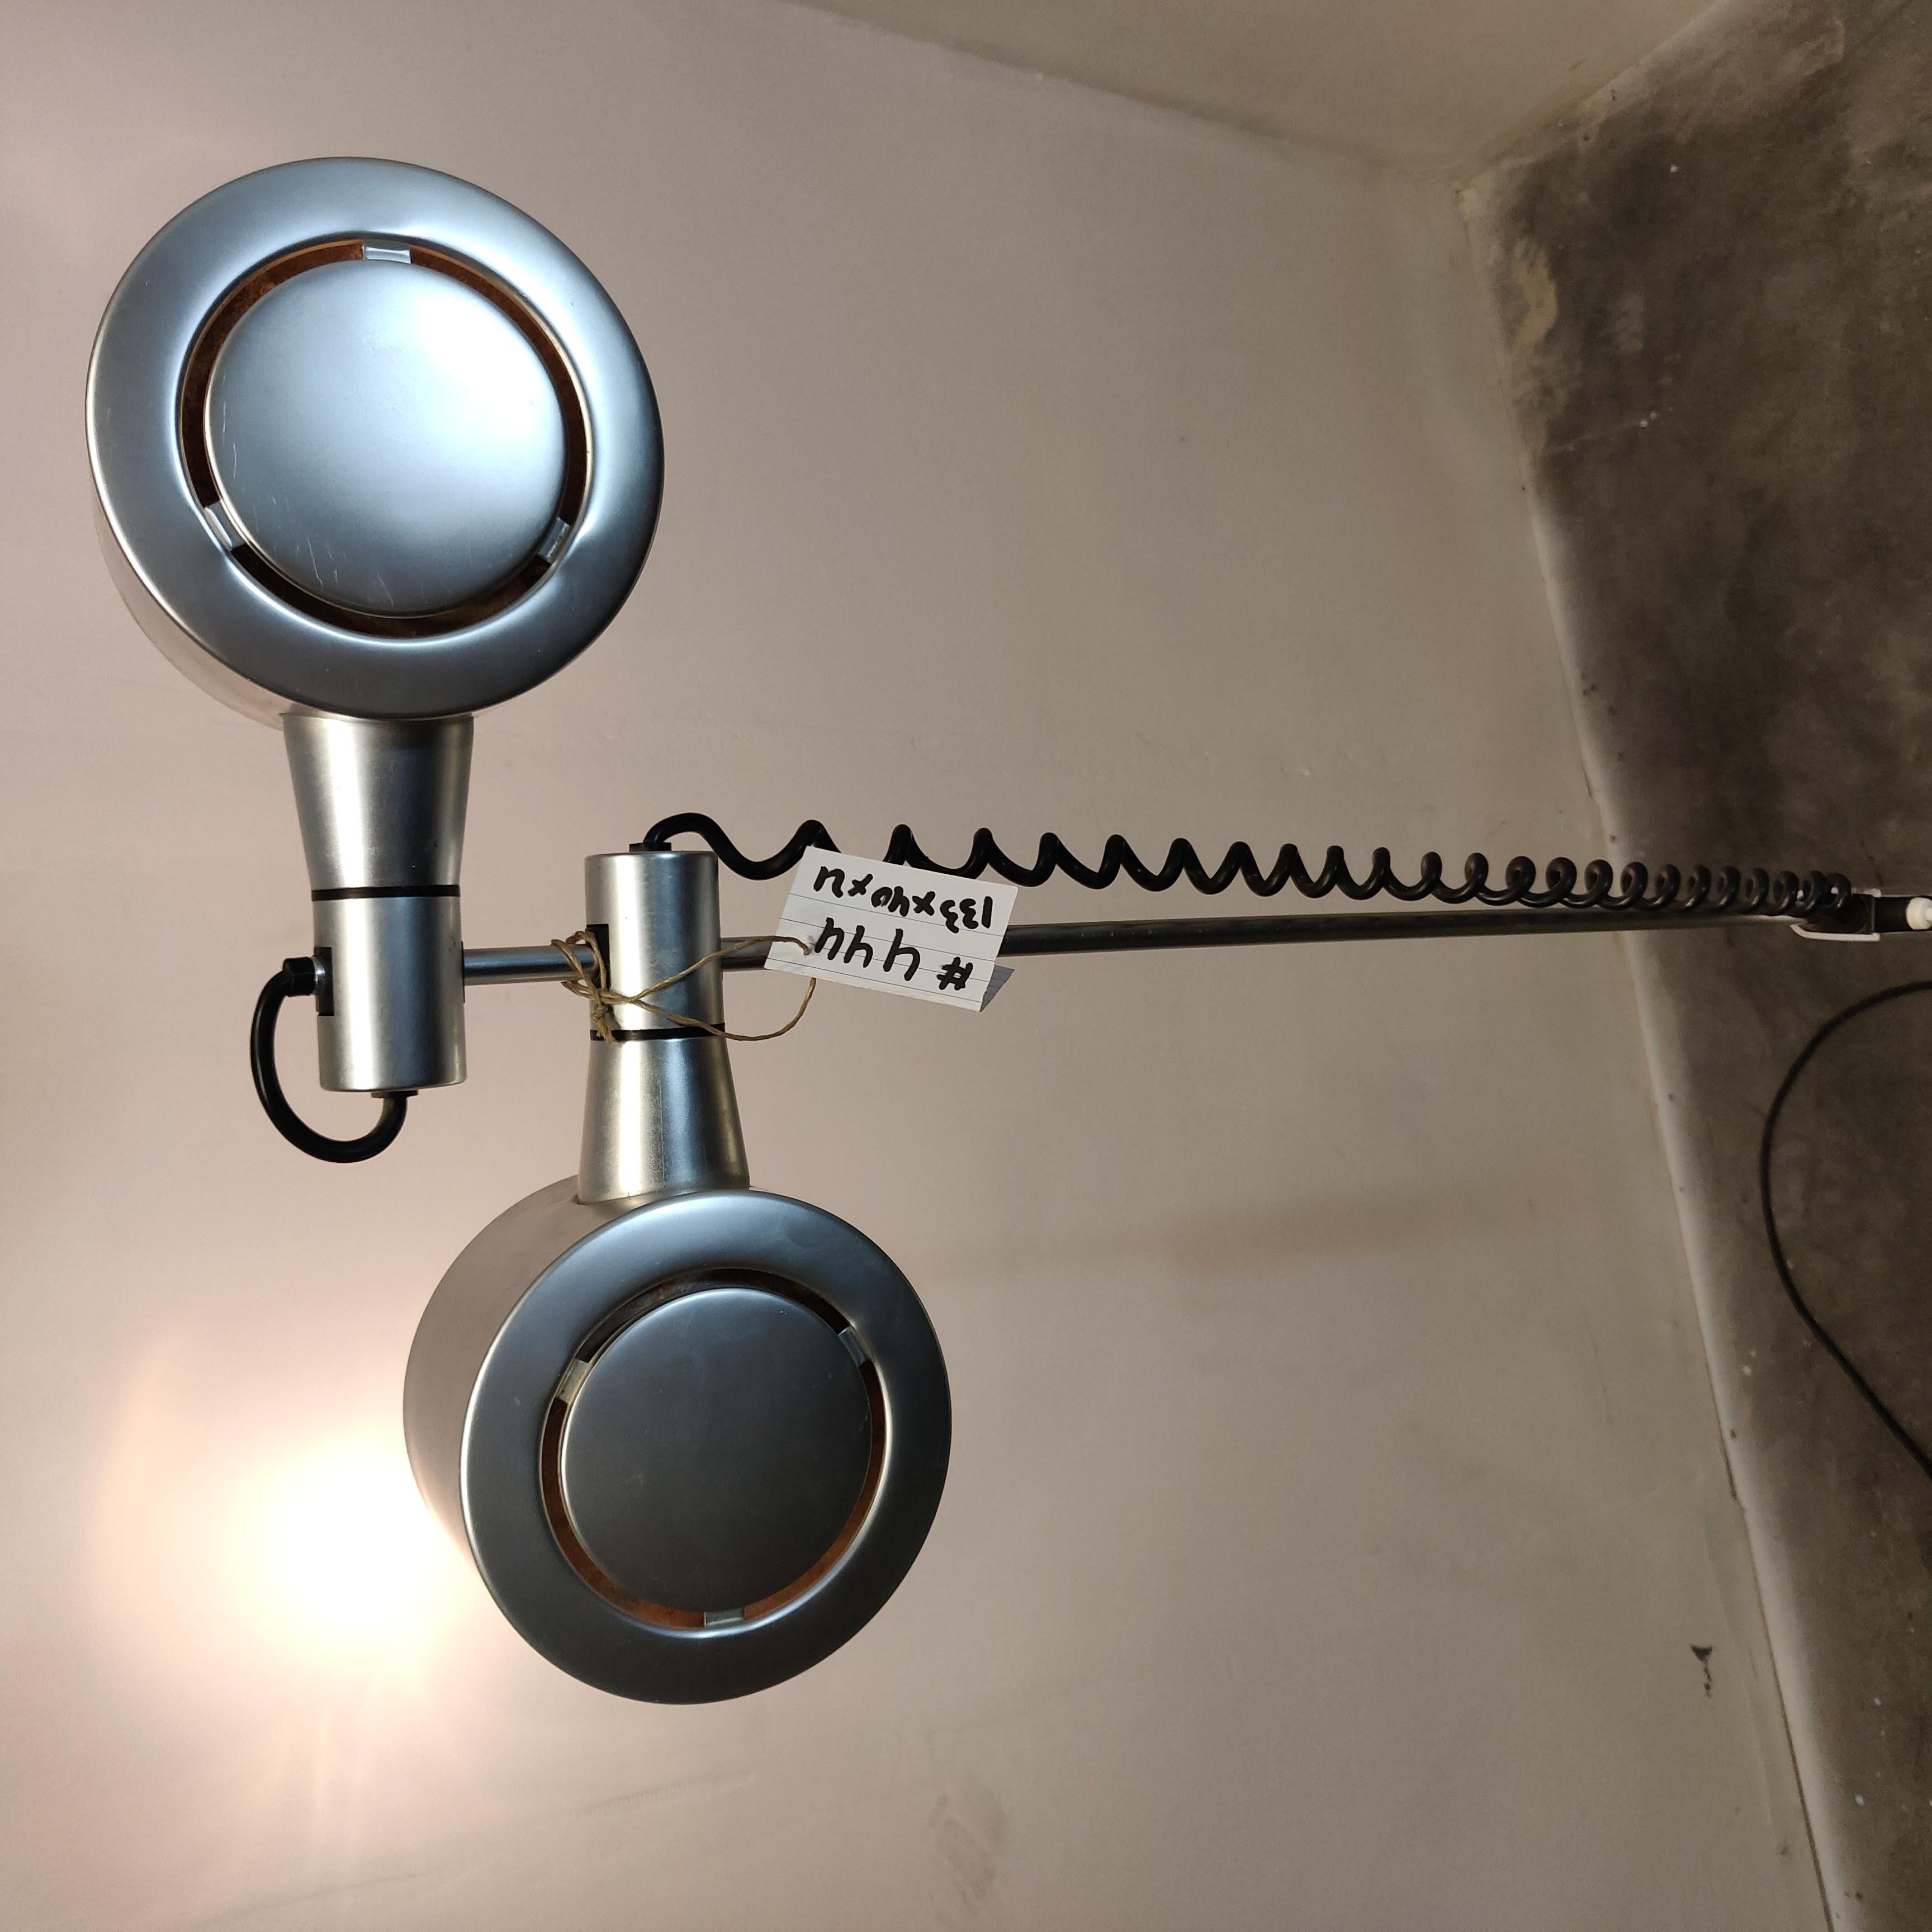 Twin spotlight floor lamp by Ronald Holmes Conelight limited, 1970s For Sale 1